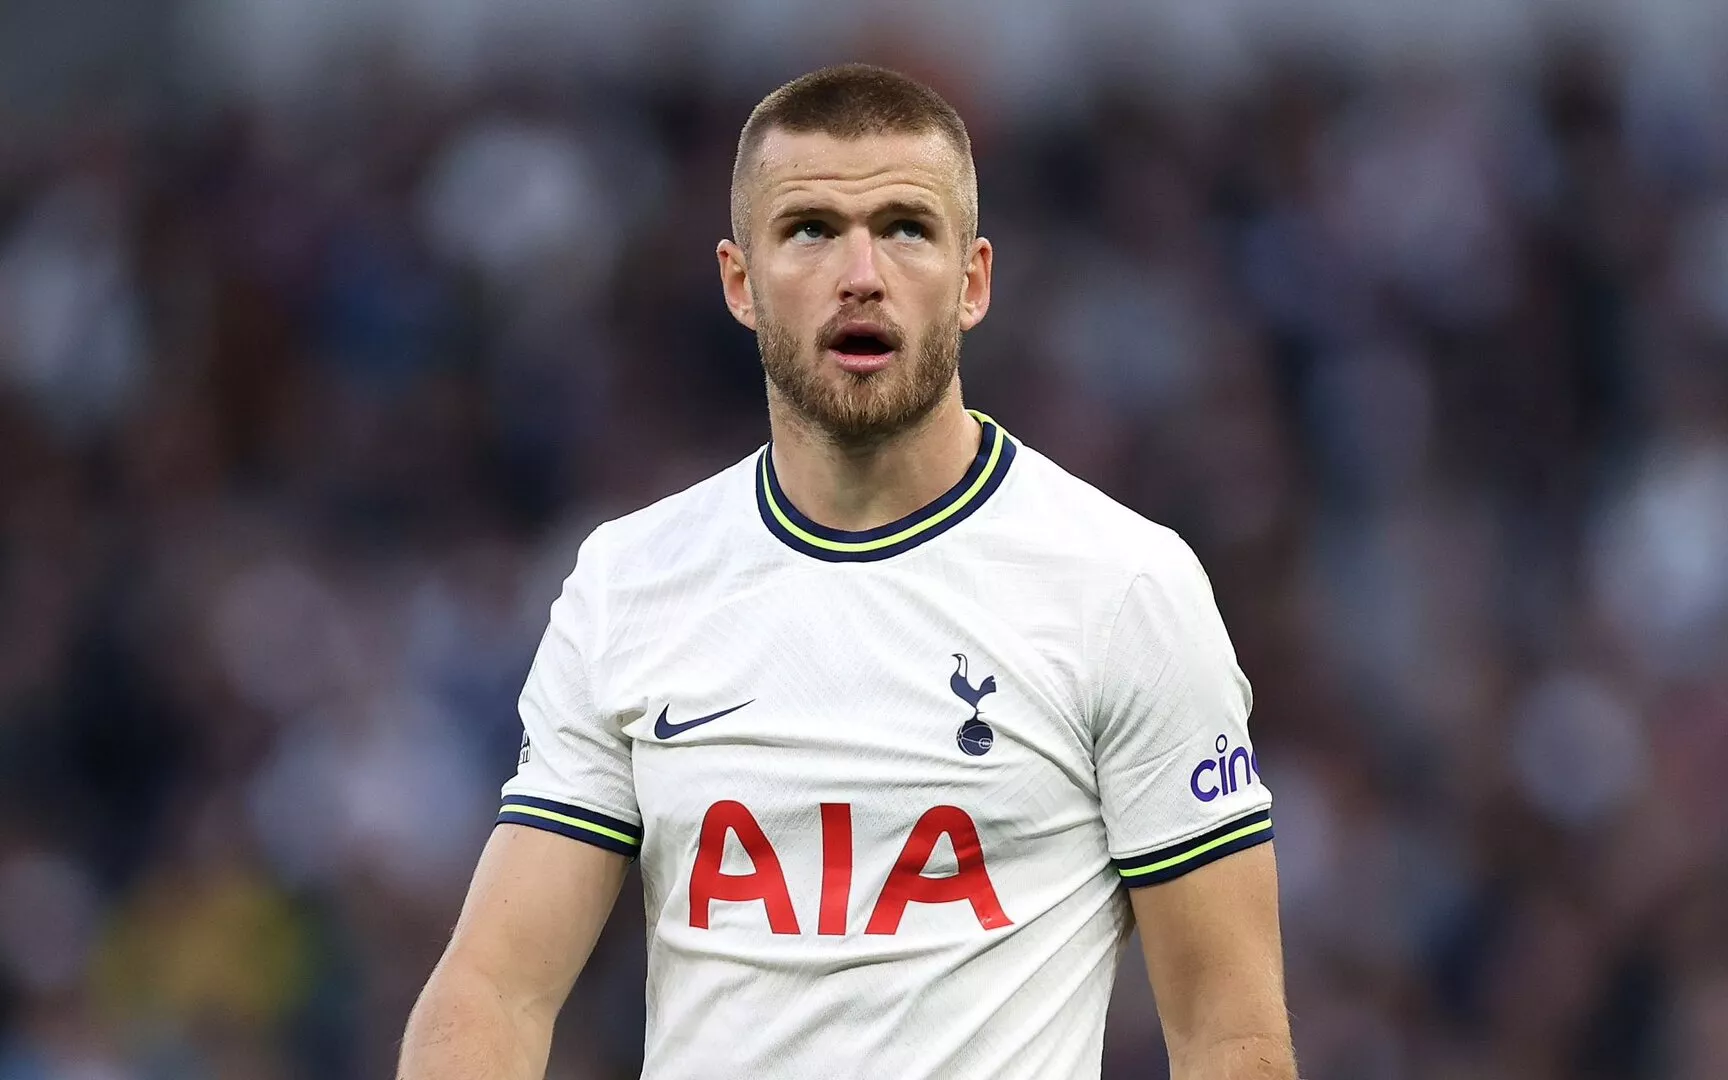 AS Roma consider January loan move for Eric Dier